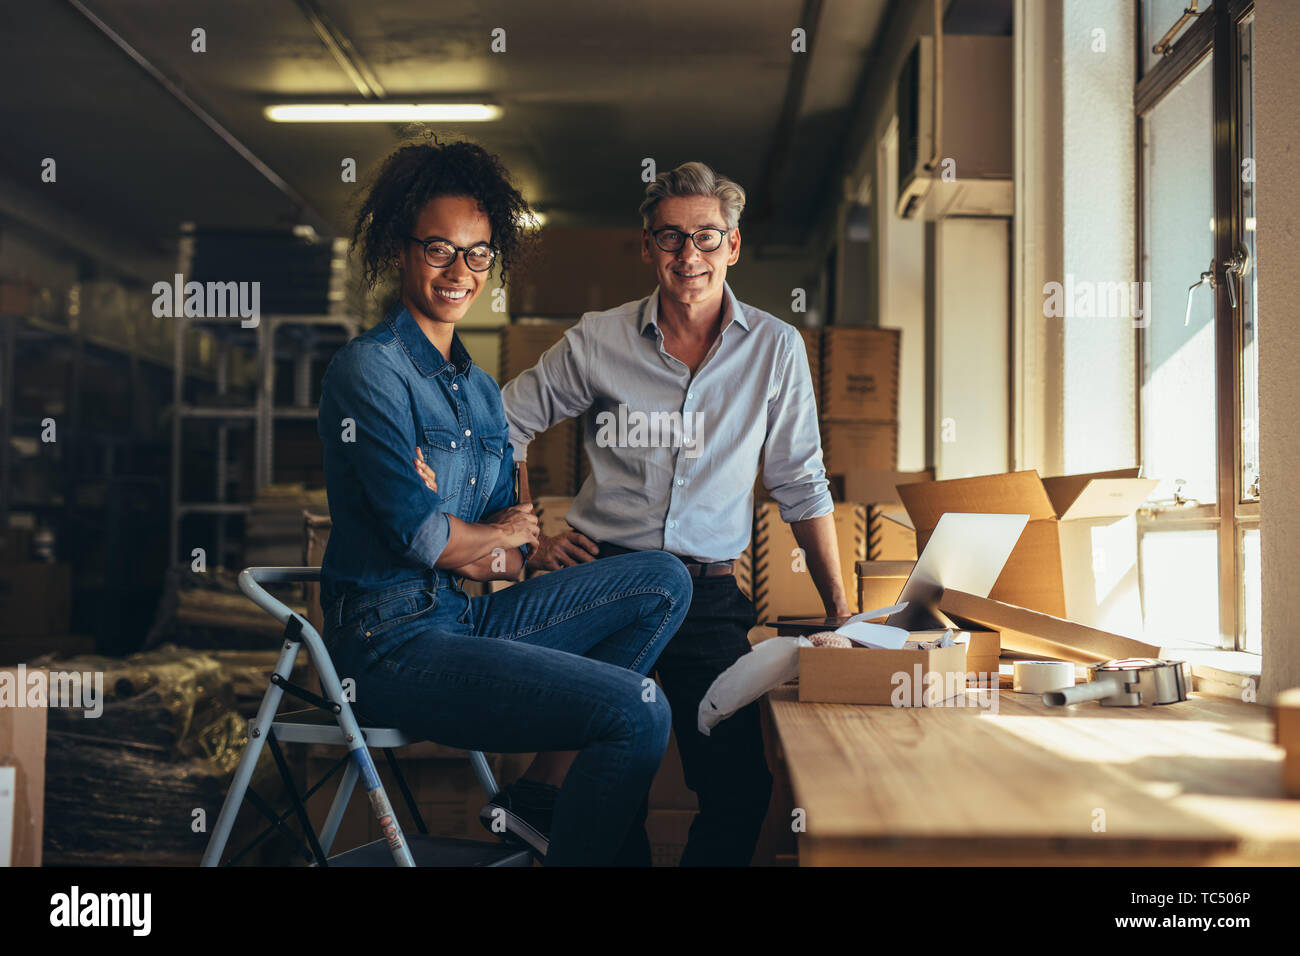 Portrait of man and woman standing in online store warehouse. Business partners together looking at camera and smiling. Stock Photo